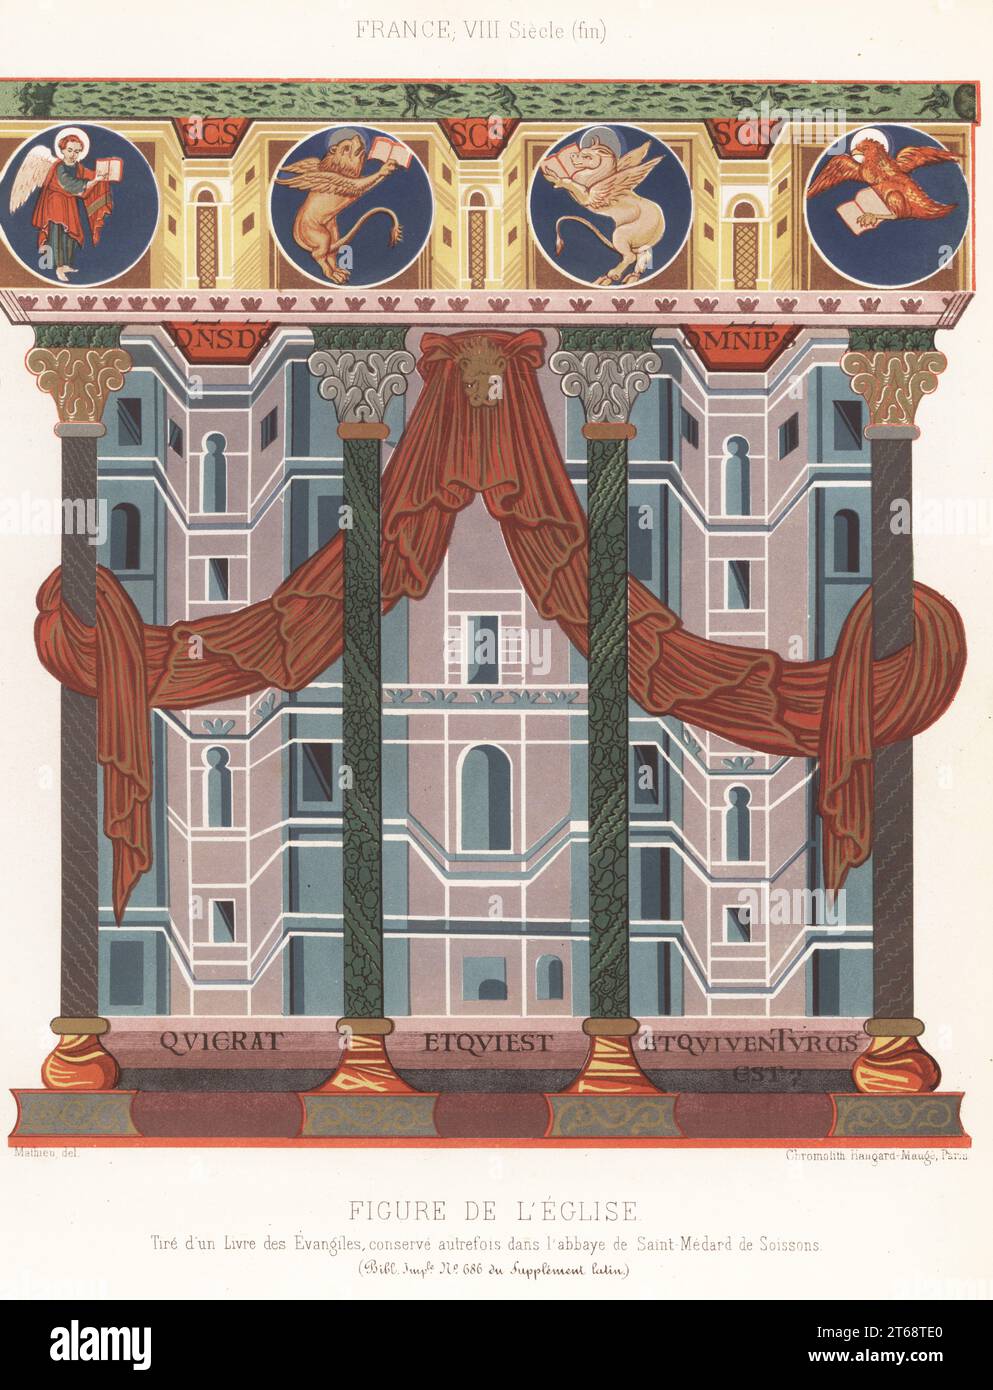 The Temple of Jerusalem with columns and drapes. Four allegorial evangelists at top: angel Matthew, bull Luke, lion Mark, and eagle John. Figure de l'Eglise, France, VIIIe siecle. Taken from a manuscript formerly kept at the Abbey of Saint-Medard de Soissons. MS 686 Sup. Latin, Bibliotheque Imperiale. Chromolithograph after an illustration by Mathieu from Charles Louandres Les Arts Somptuaires, The Sumptuary Arts, Hangard-Mauge, Paris, 1858. Stock Photo